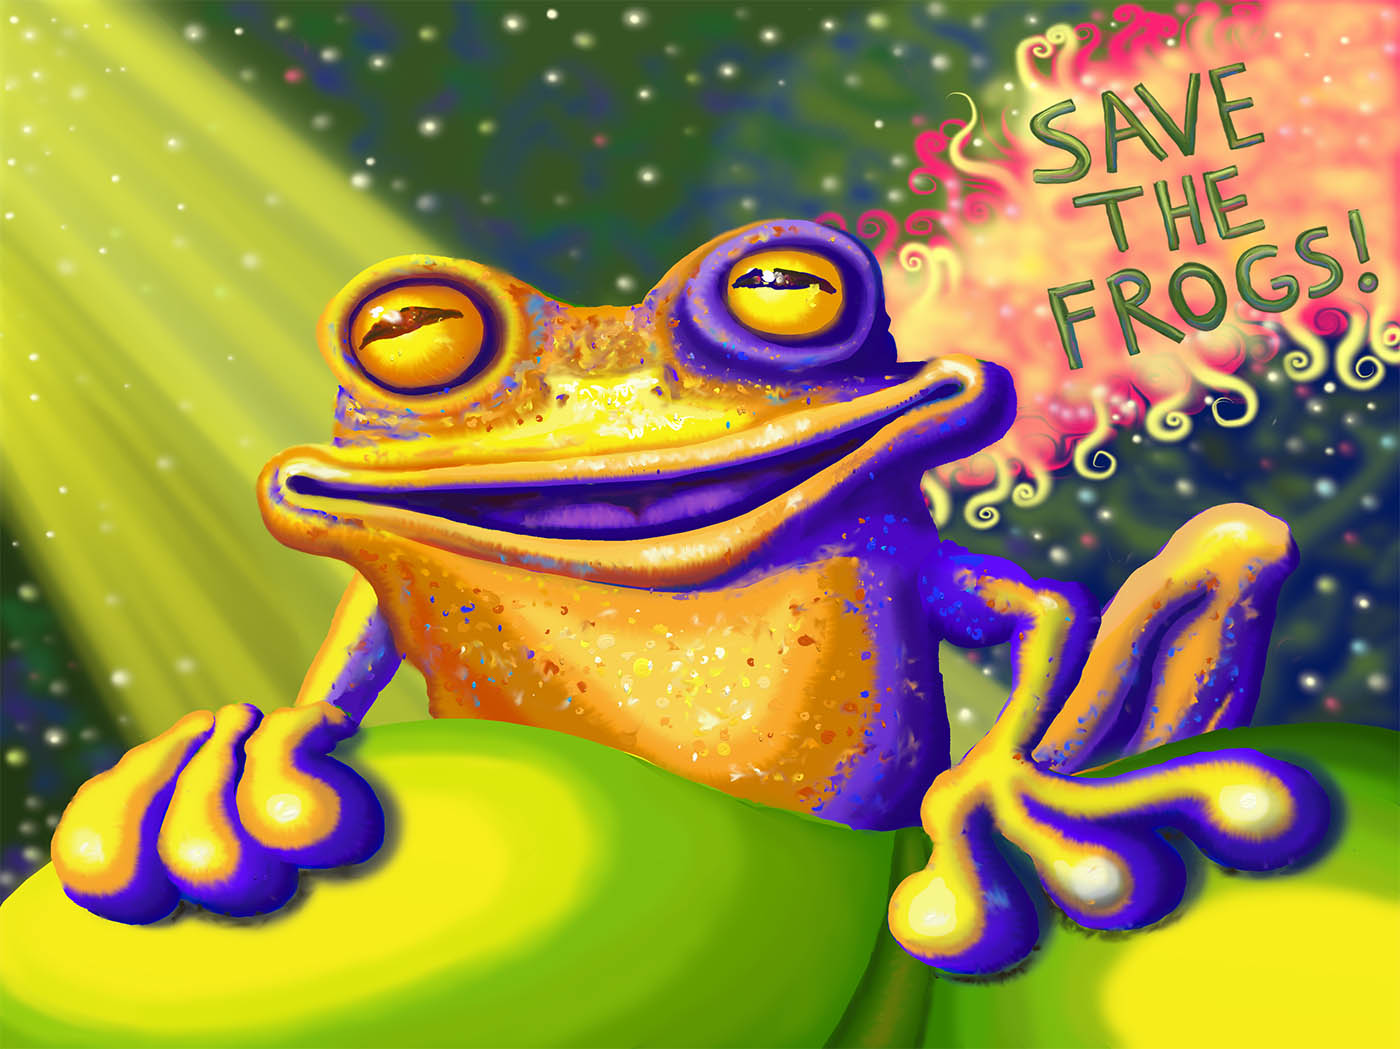 Frog Art by Christine Marsh - 2011 SAVE THE FROGS! Art Contest